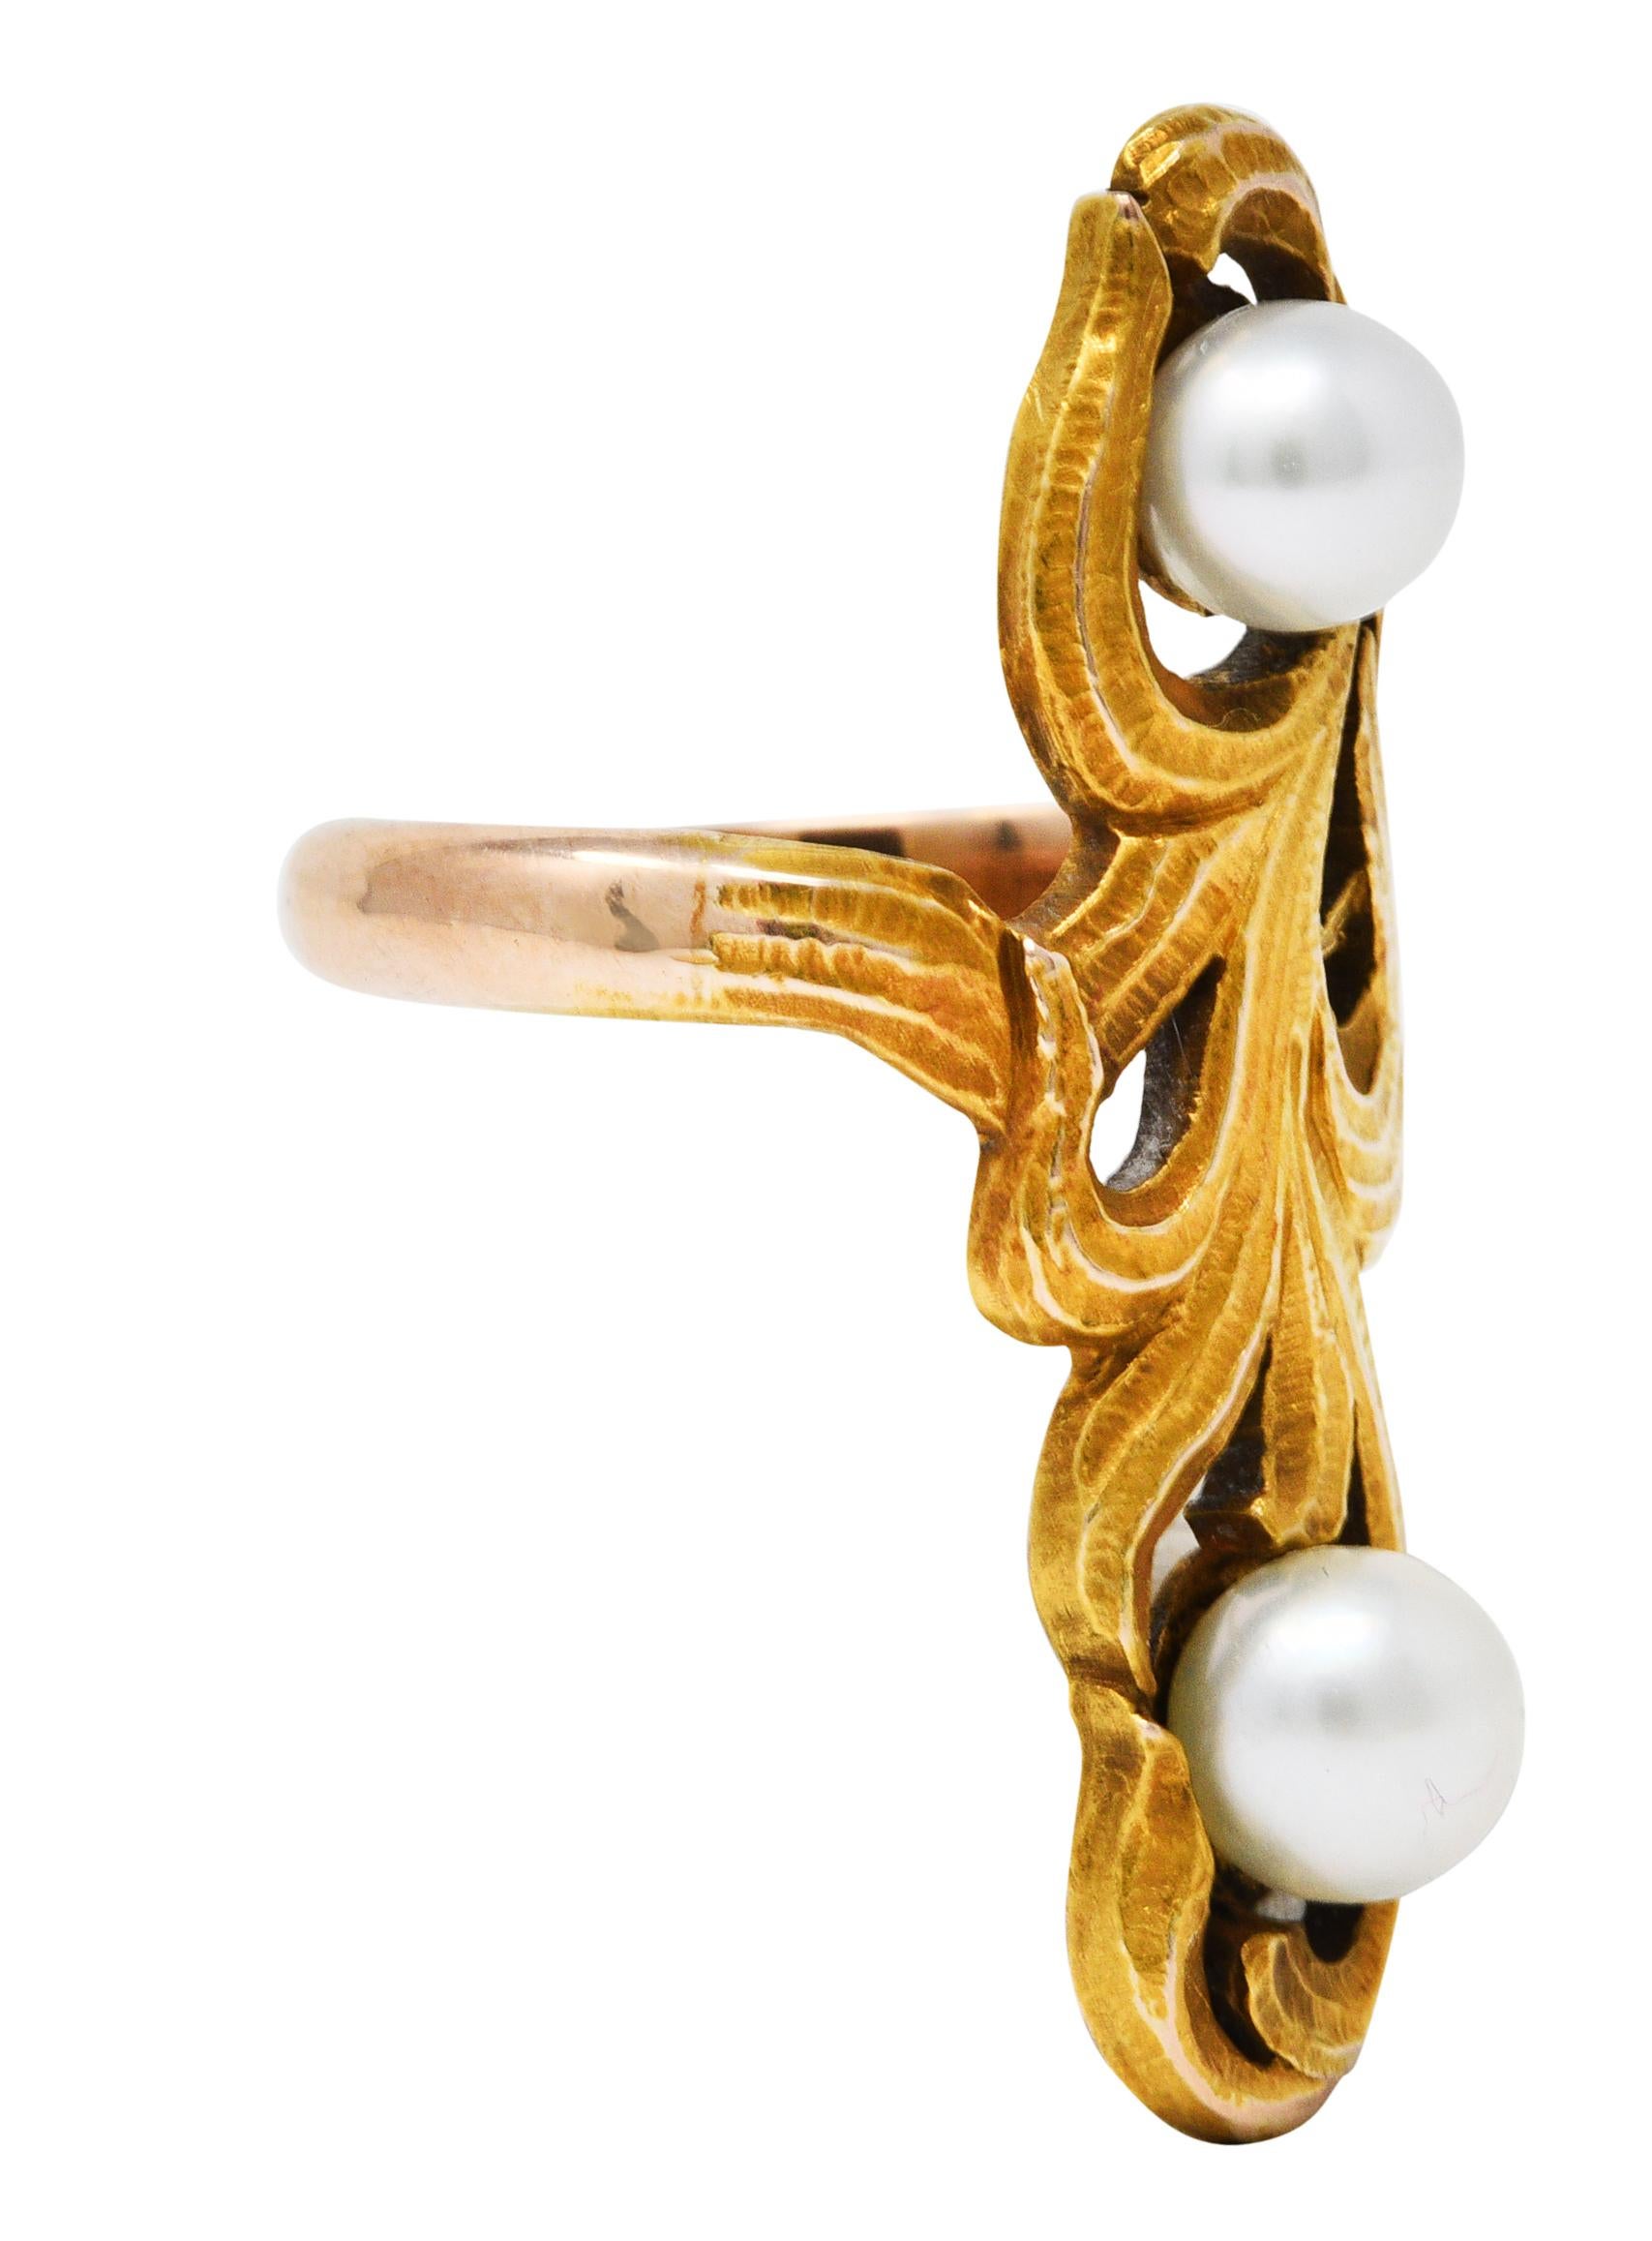 Full finger ring is designed as scrolling foliate

Whiplash style with a matte gold and subtly hammered finish

Featuring two button pearls measuring 5.0 and 5.5 mm

White and grayish in color with moderate rosè overtones and excellent